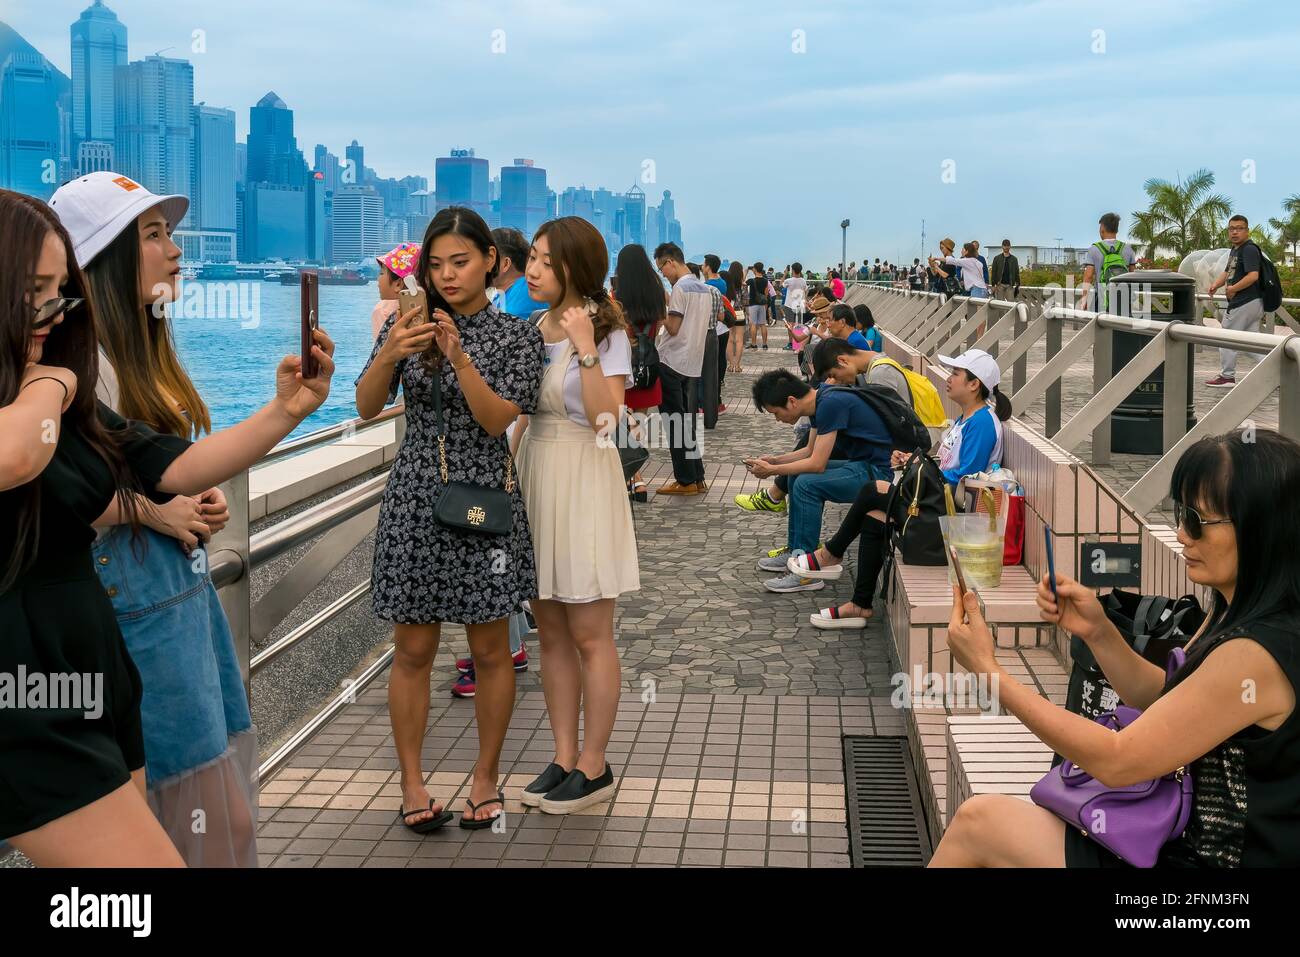 Selfie City in Hong Kong.  Everyone is taking a selfie while an amazing backdrop awaits. Stock Photo